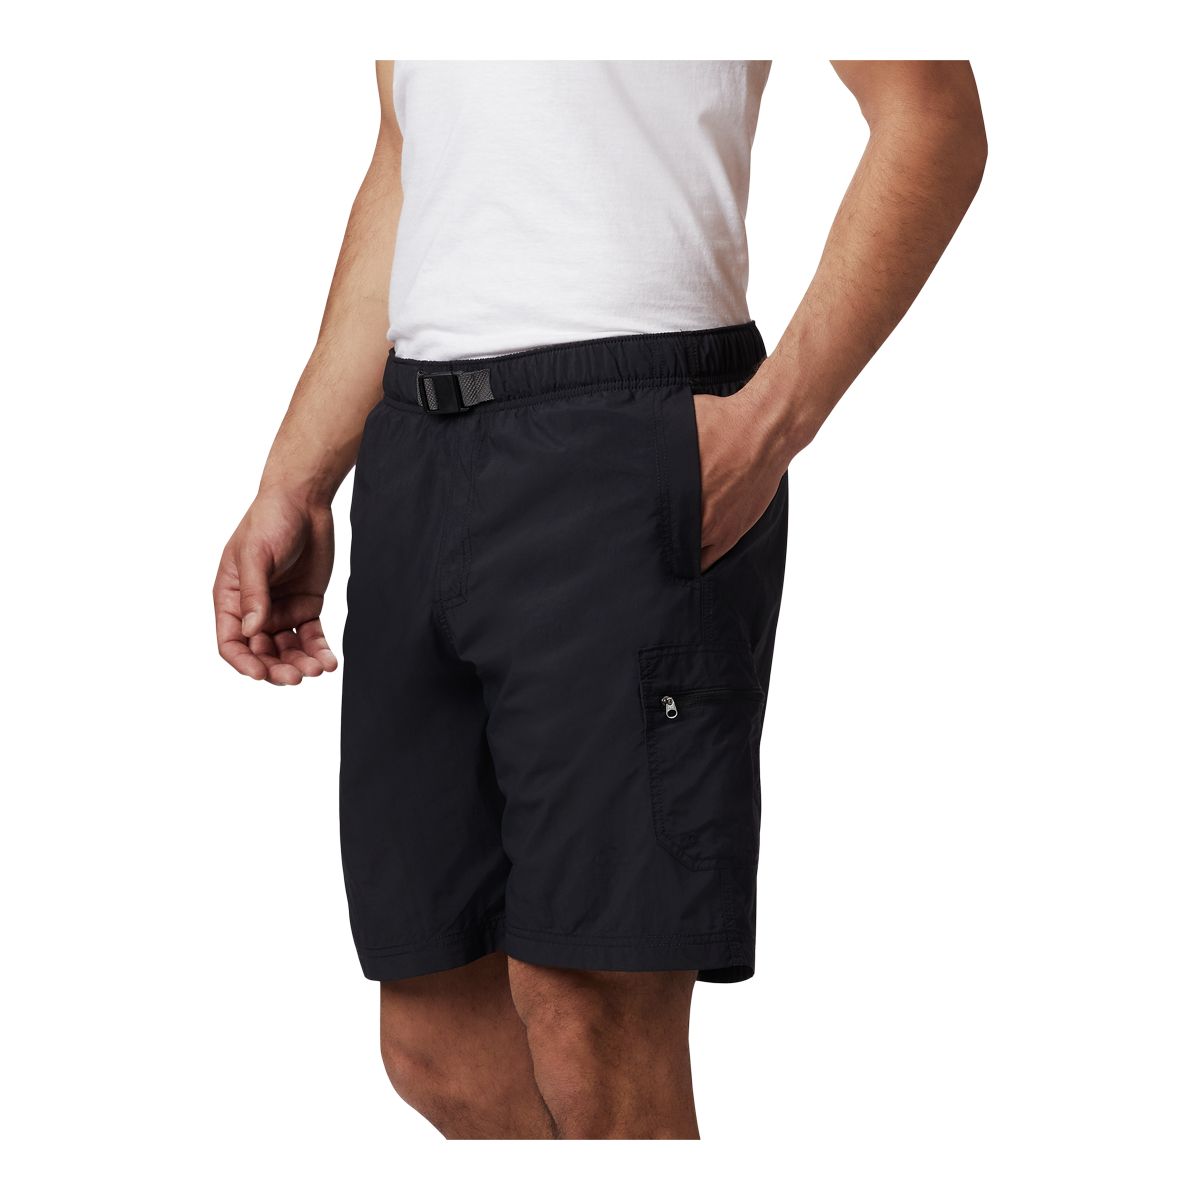 https://media-www.sportchek.ca/product/div-03-softgoods/dpt-72-casual-clothing/sdpt-01-mens/334037893/columbia-men-s-palmerston-peak-shorts-dc2886a6-7d24-4563-b9fe-8076b0801221-jpgrendition.jpg?imdensity=1&imwidth=1244&impolicy=mZoom